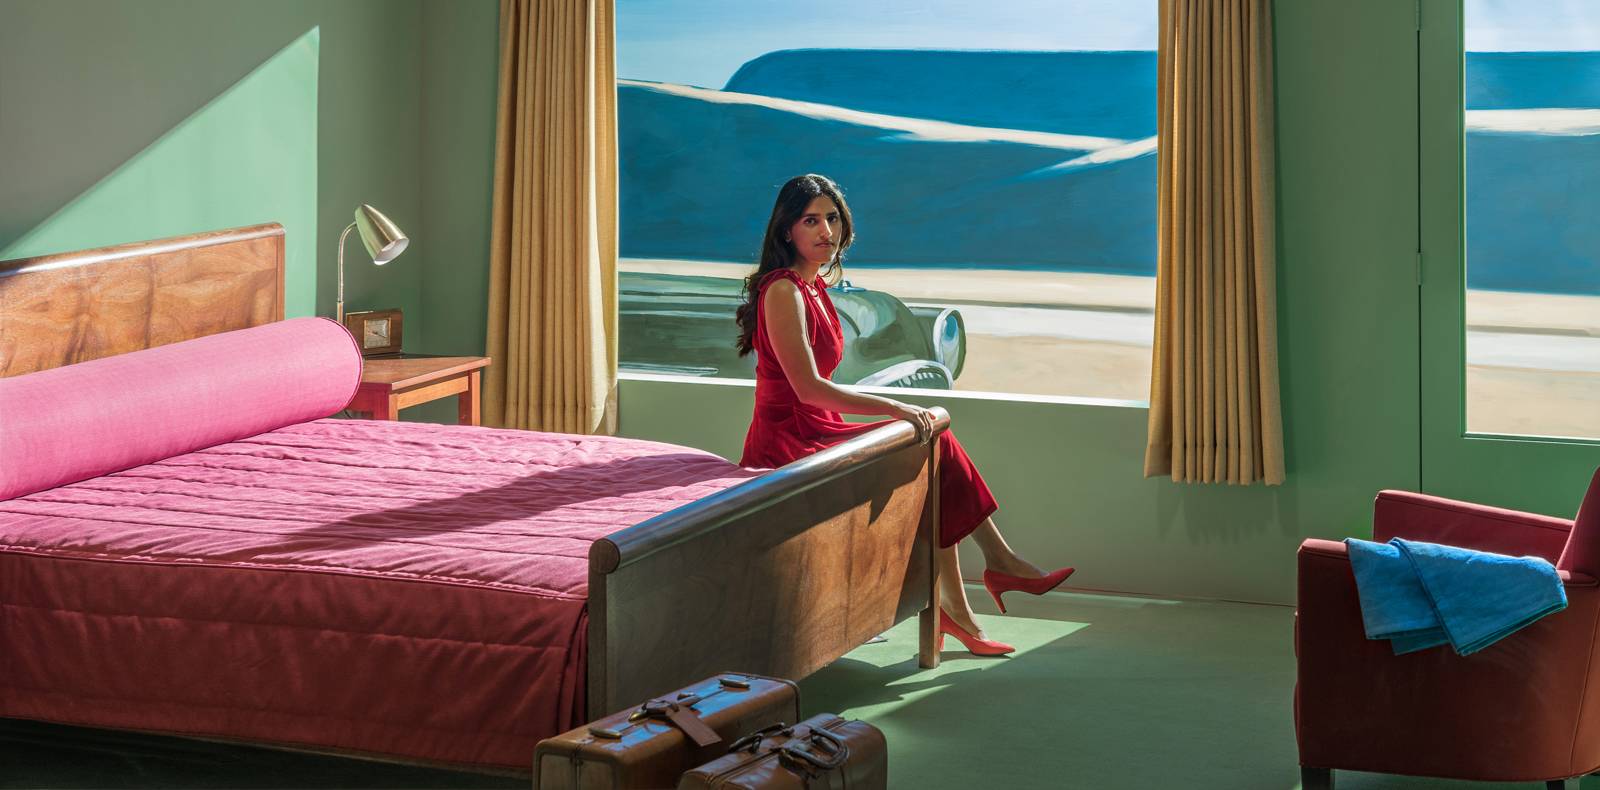 Spend the night in an Edward Hopper painting